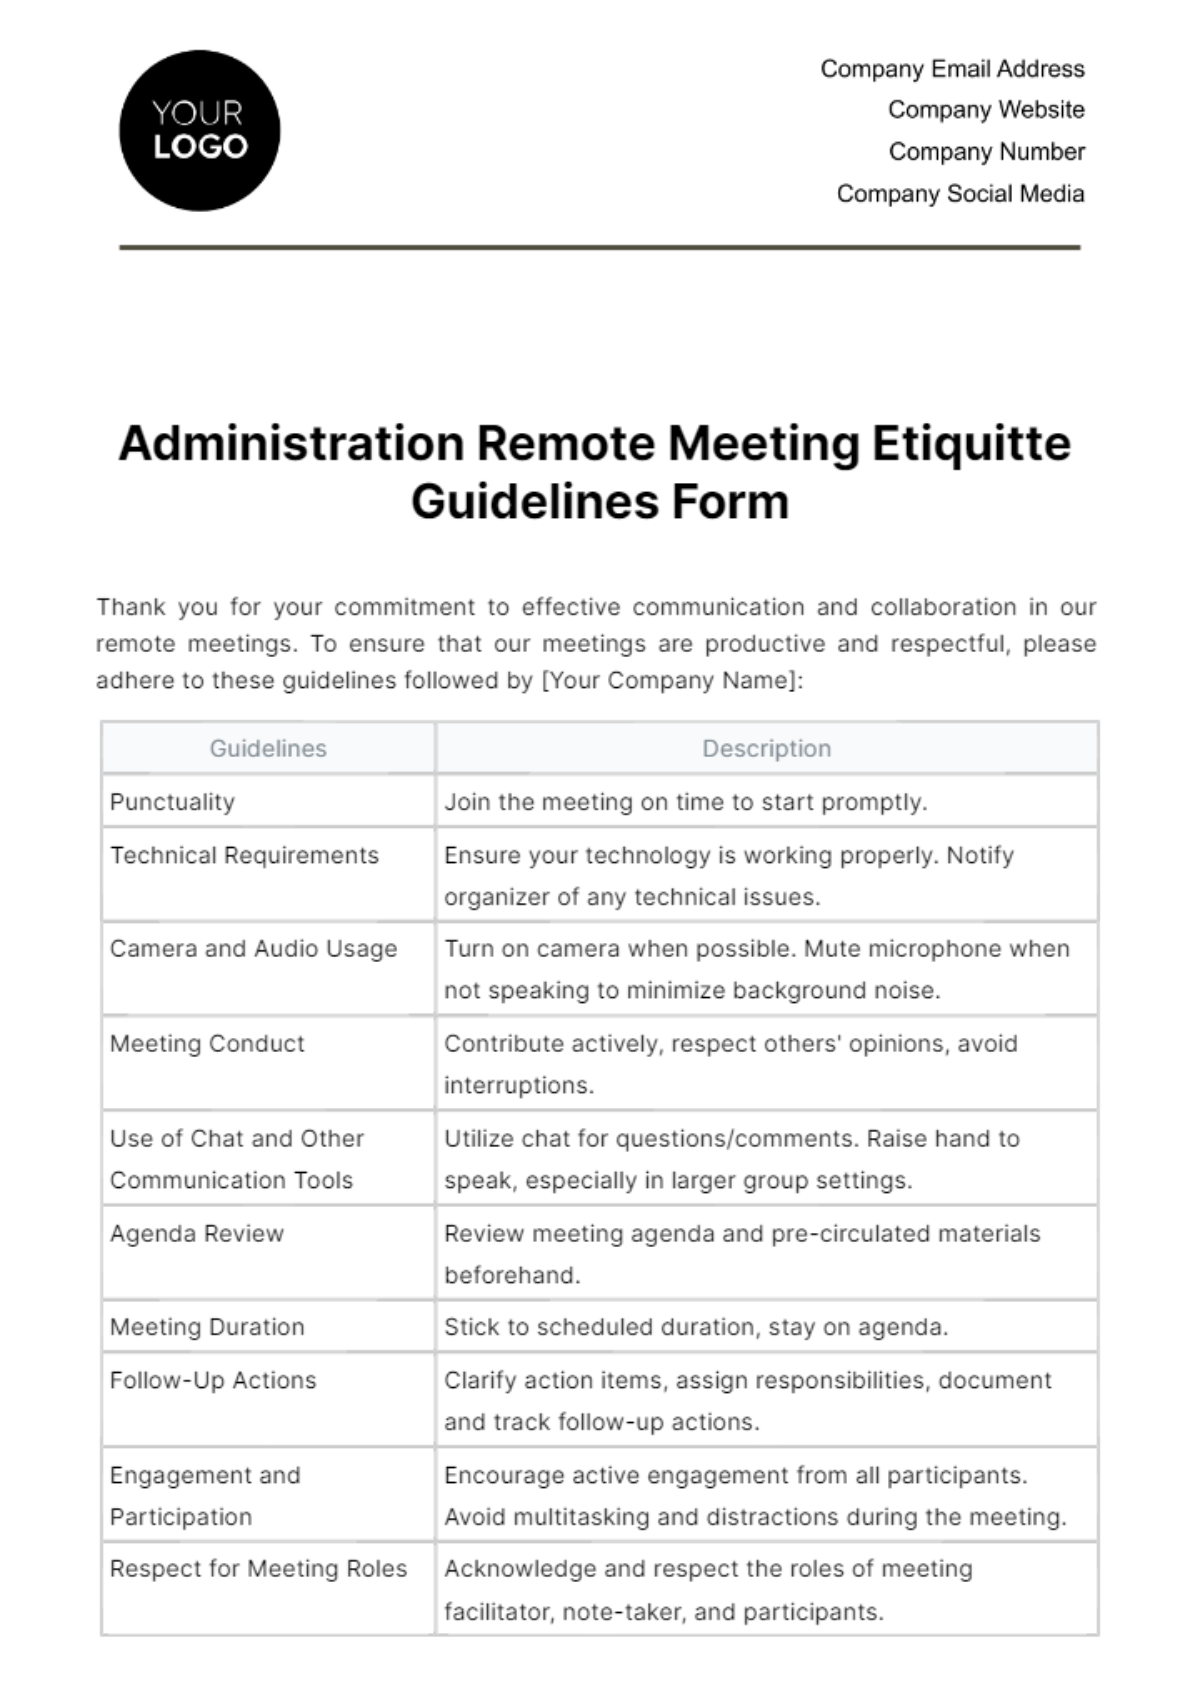 Free Administration Remote Meeting Etiquette Guidelines Form Template